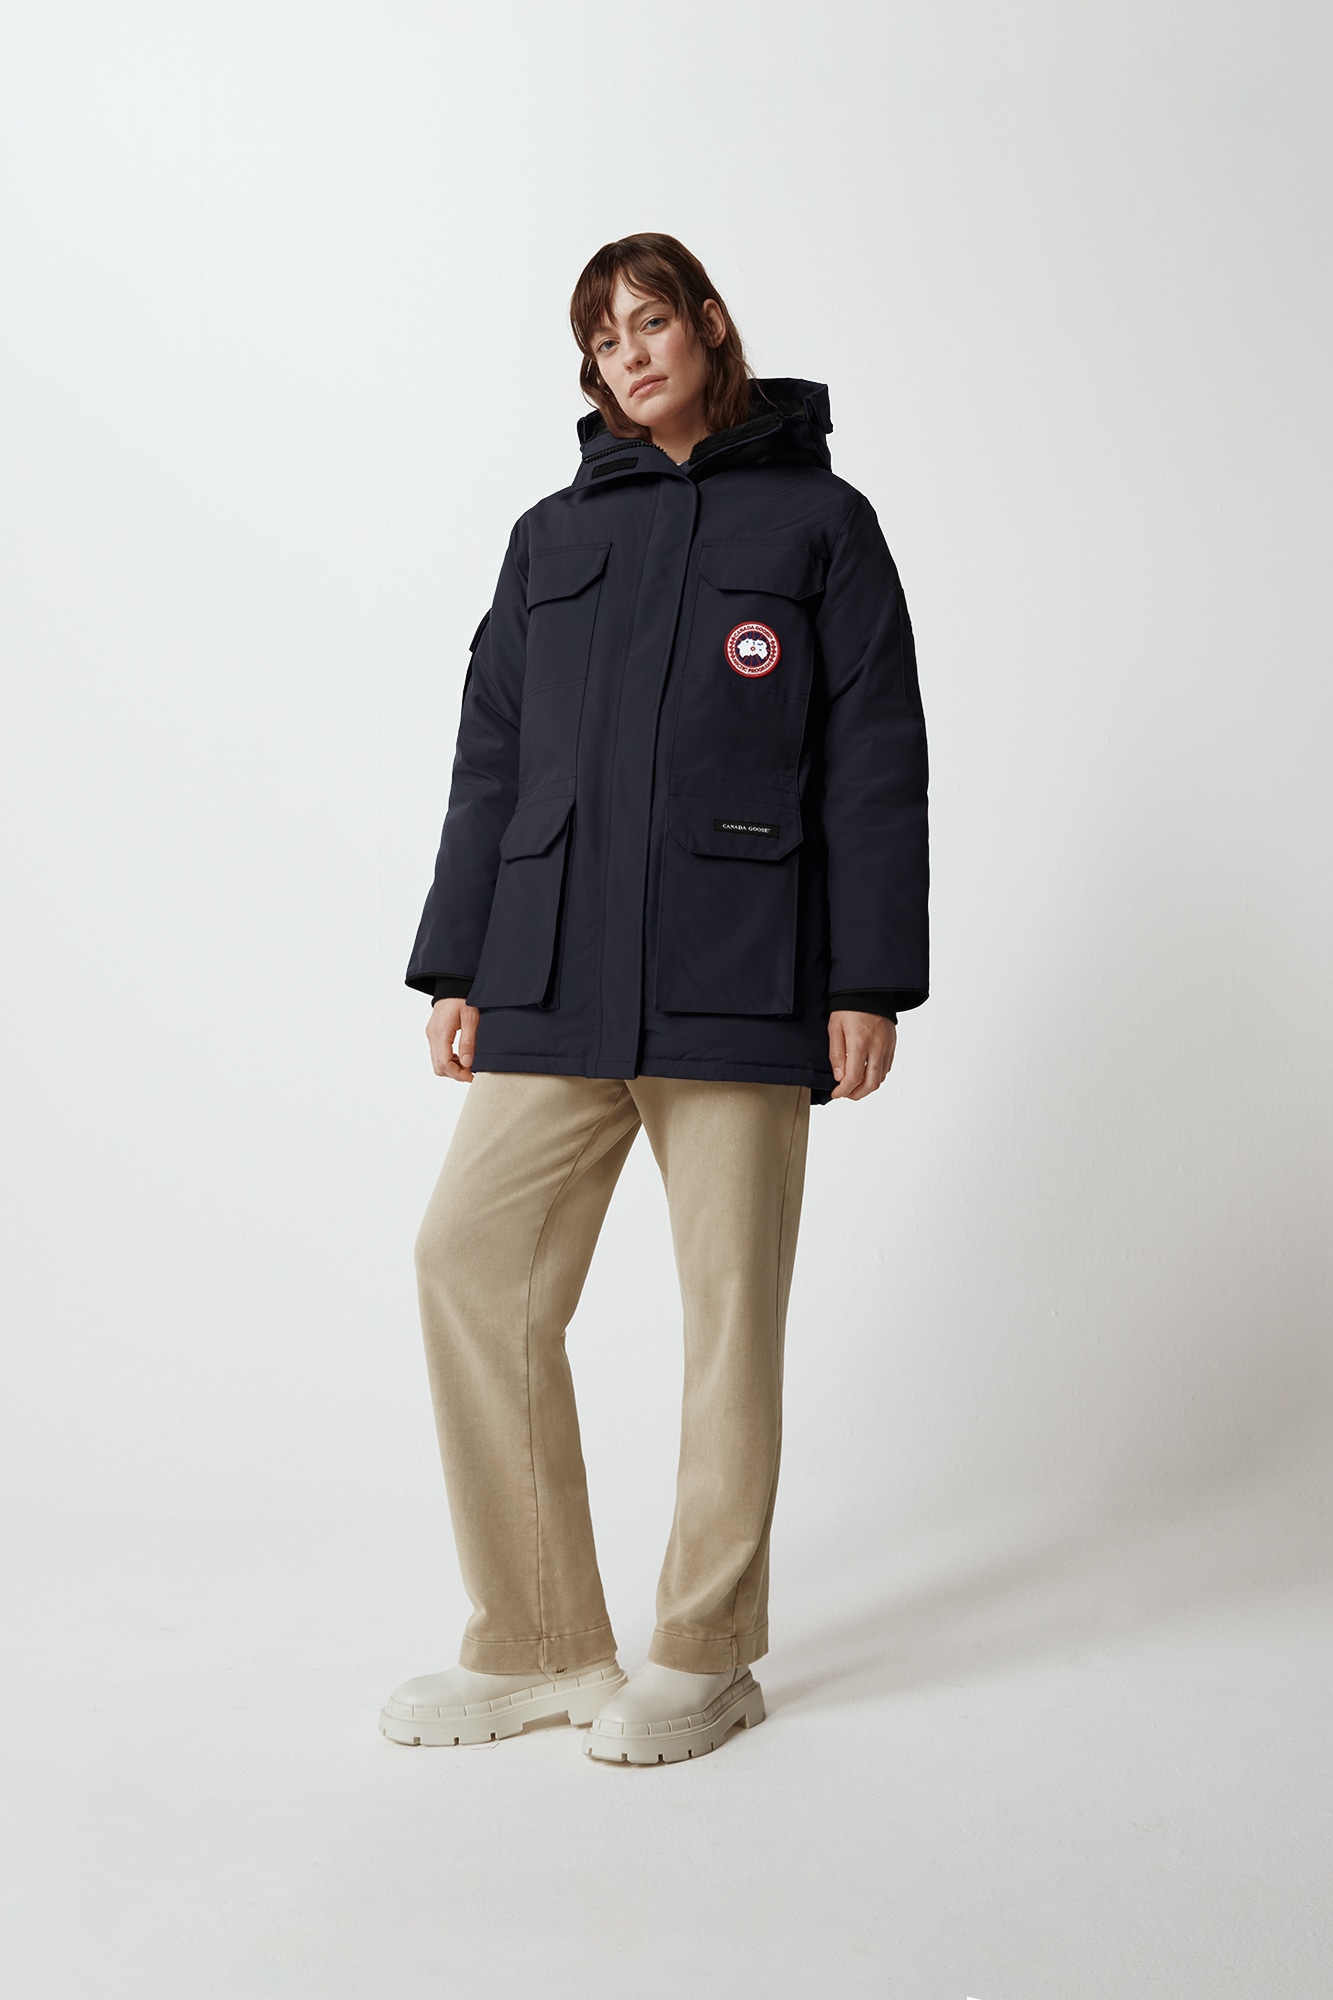 Canada Goose Expedition Parka Size Chart